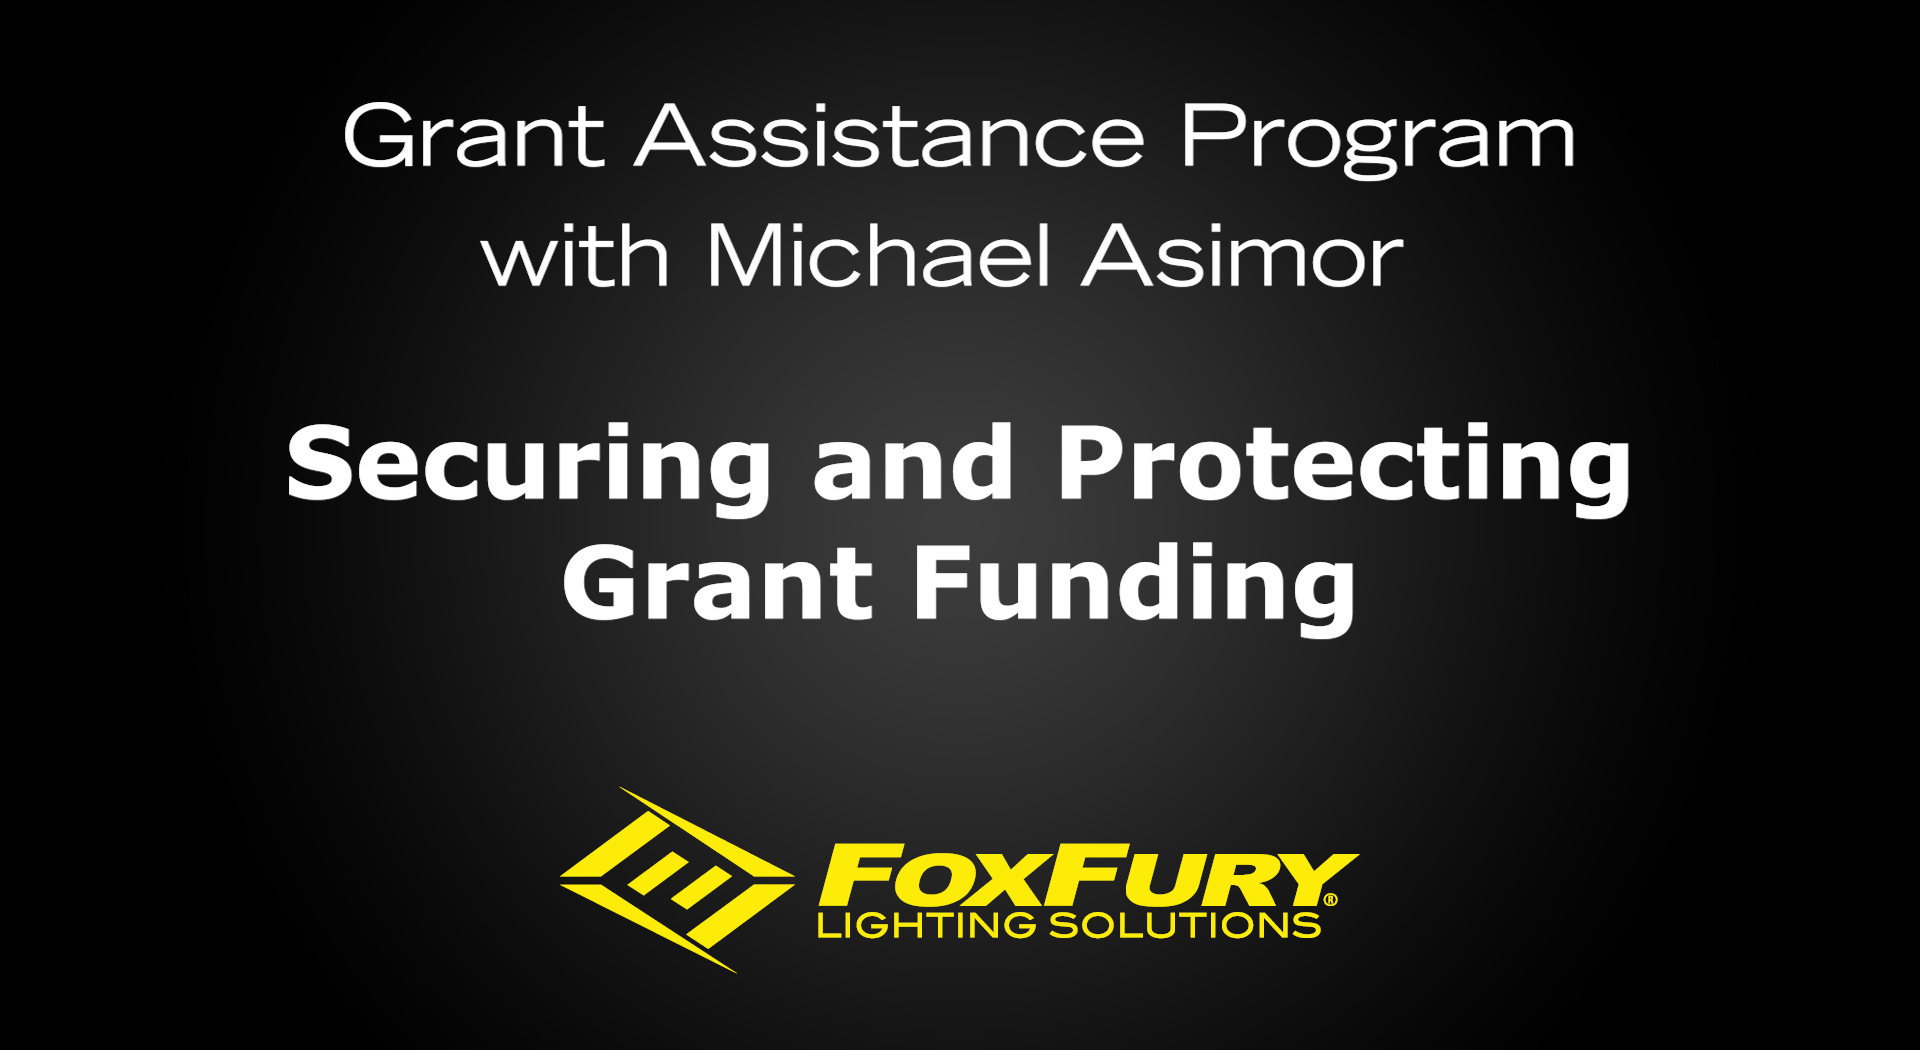 Securing and Protecting Grant Funding video